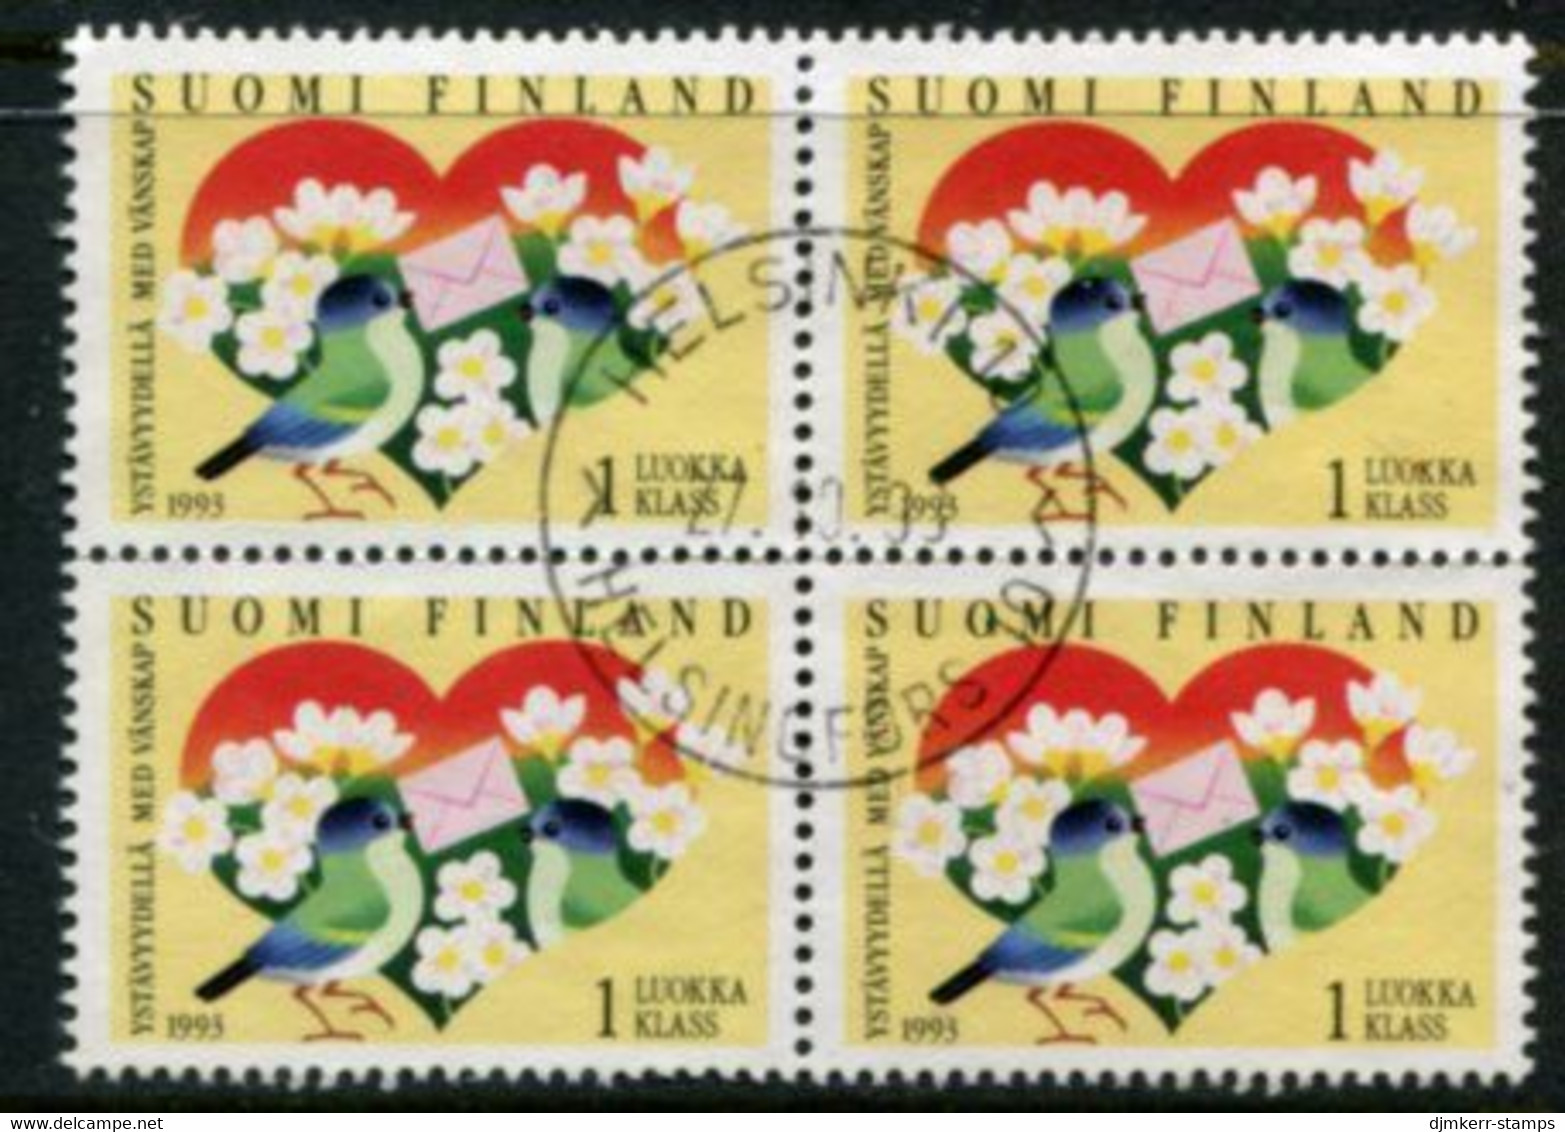 FINLAND 1993 Greetings Stamp Block Of 4  Used.  Michel  1198 - Oblitérés